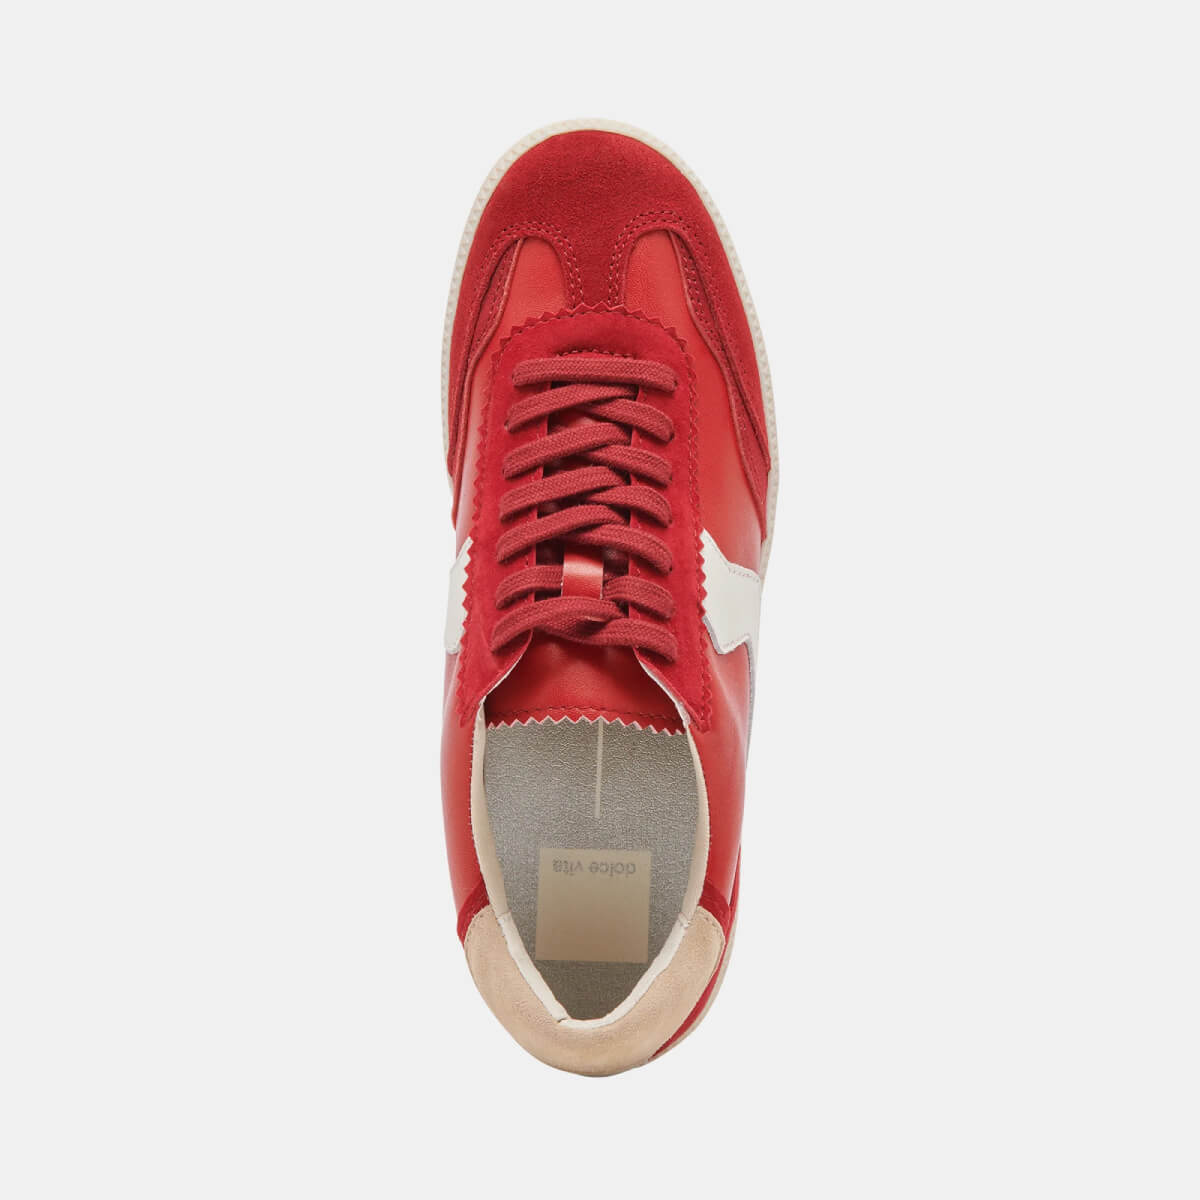 Dolce Vita Notice Sneakers red top | MILK MONEY milkmoney.co | cute shoes for women. ladies shoes. nice shoes for women. footwear for women. ladies shoes online. ladies footwear. womens shoes and boots. pretty shoes for women. beautiful shoes for women.